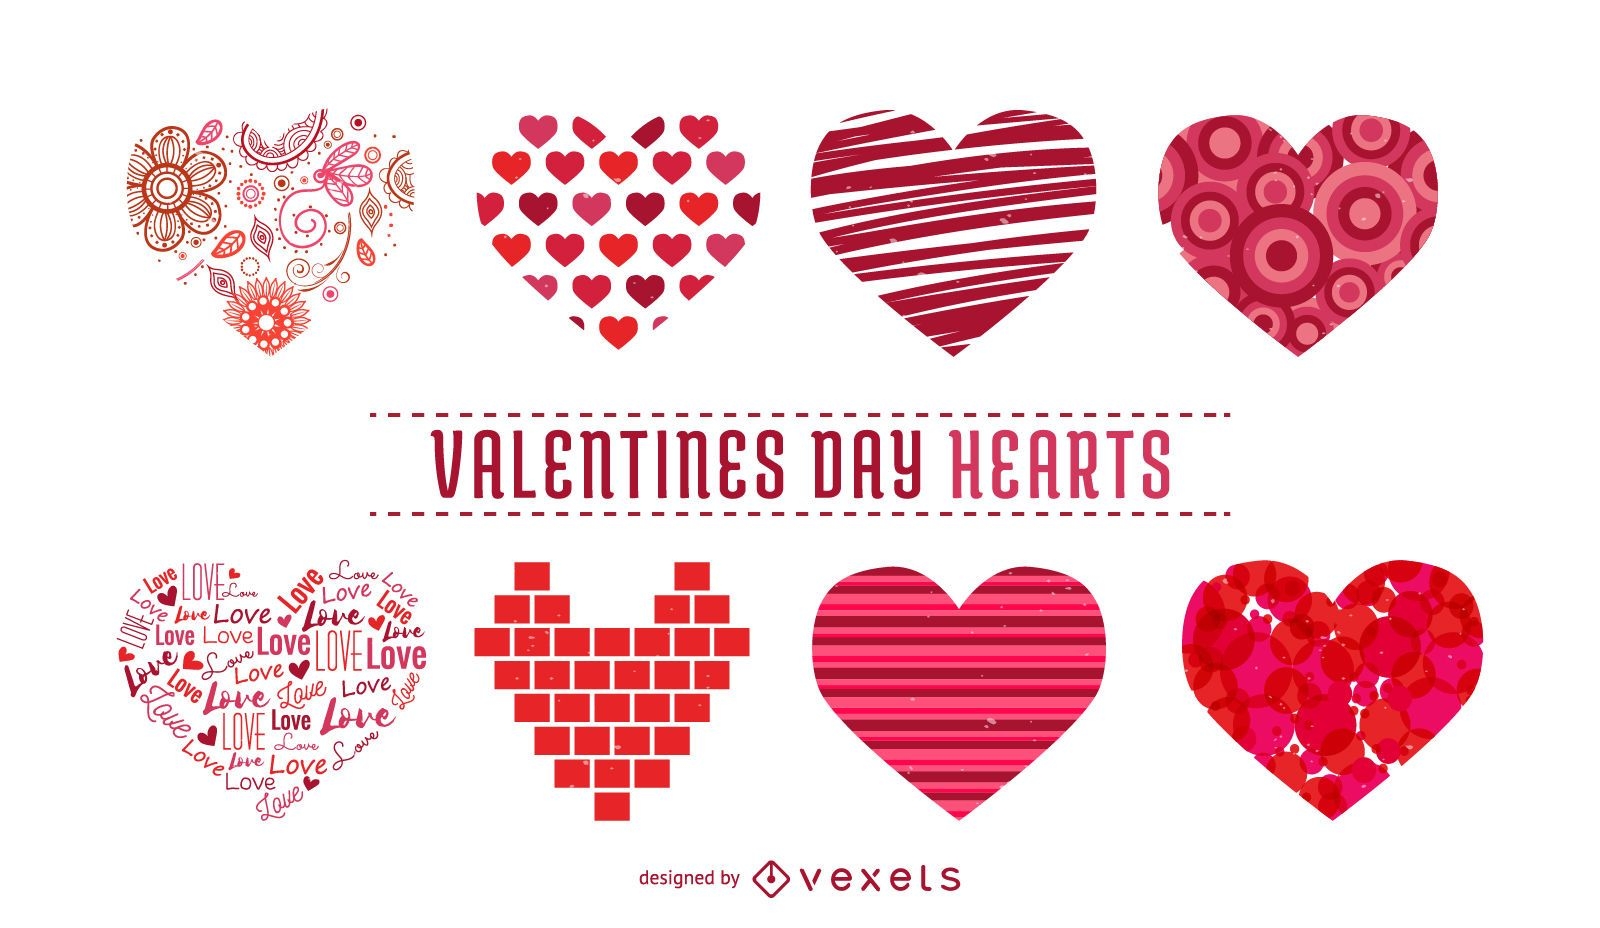 Heart illustrations collection